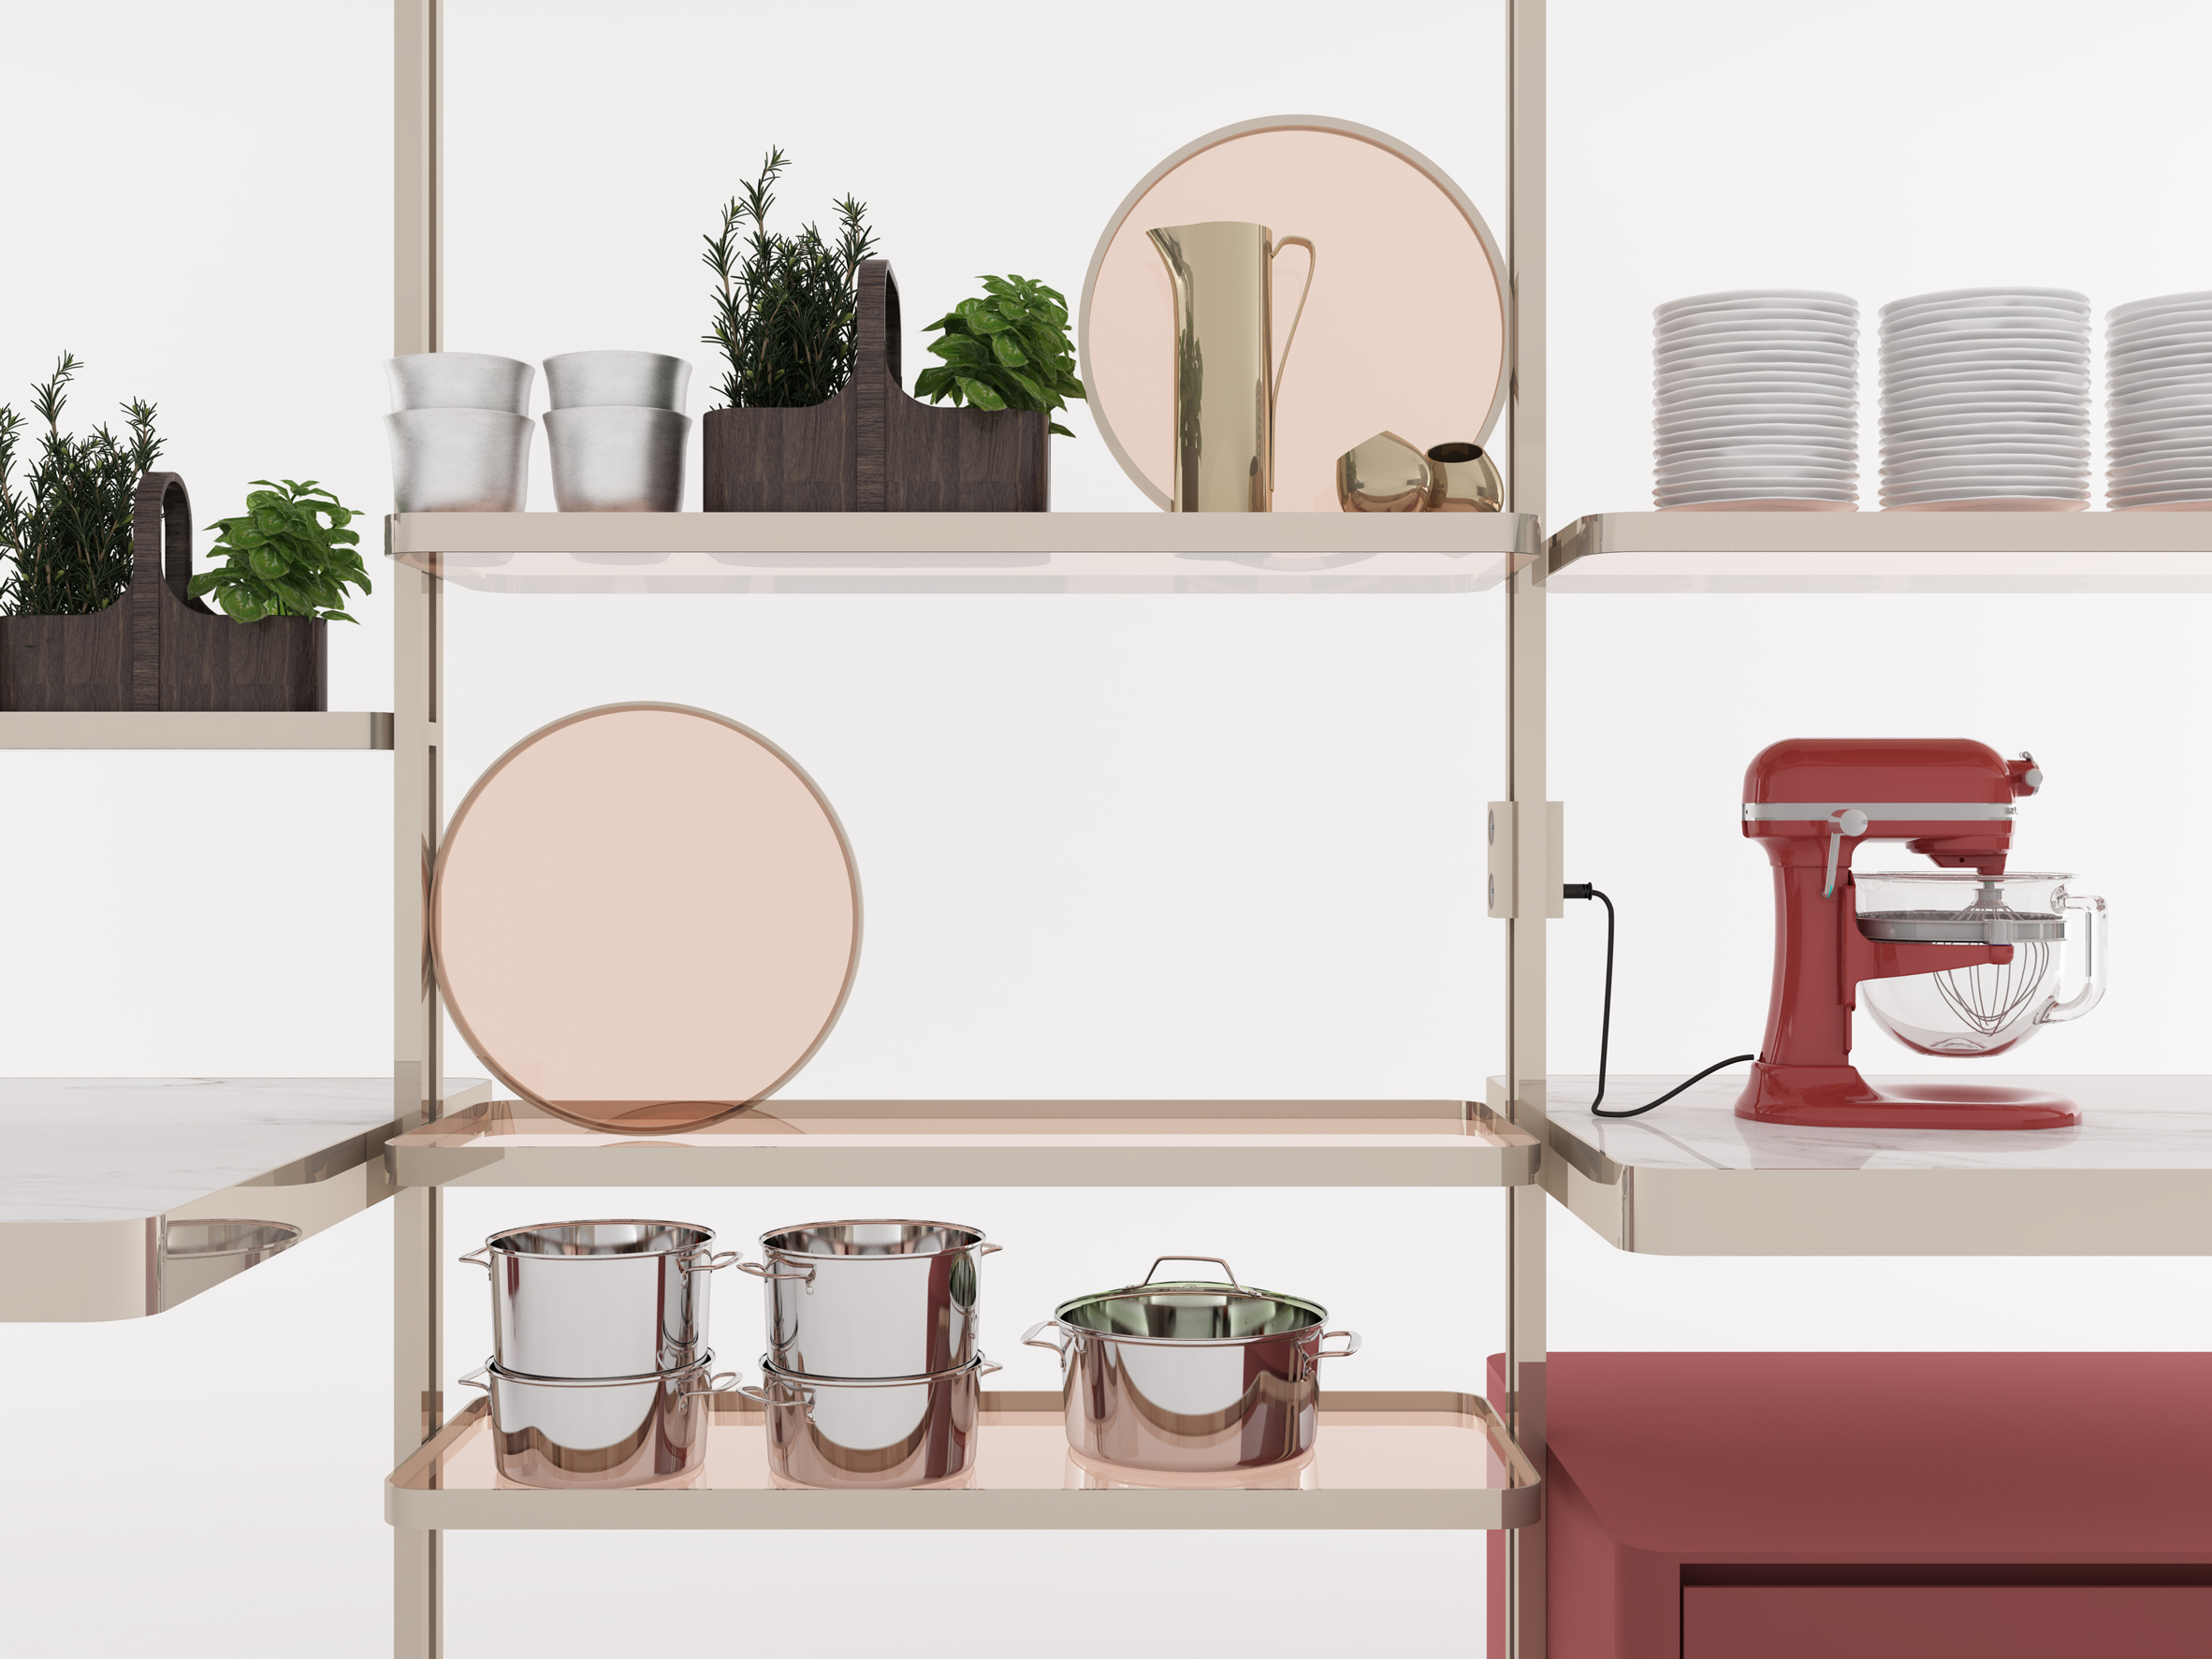 Eight architects and designers imagine the kitchens of the future